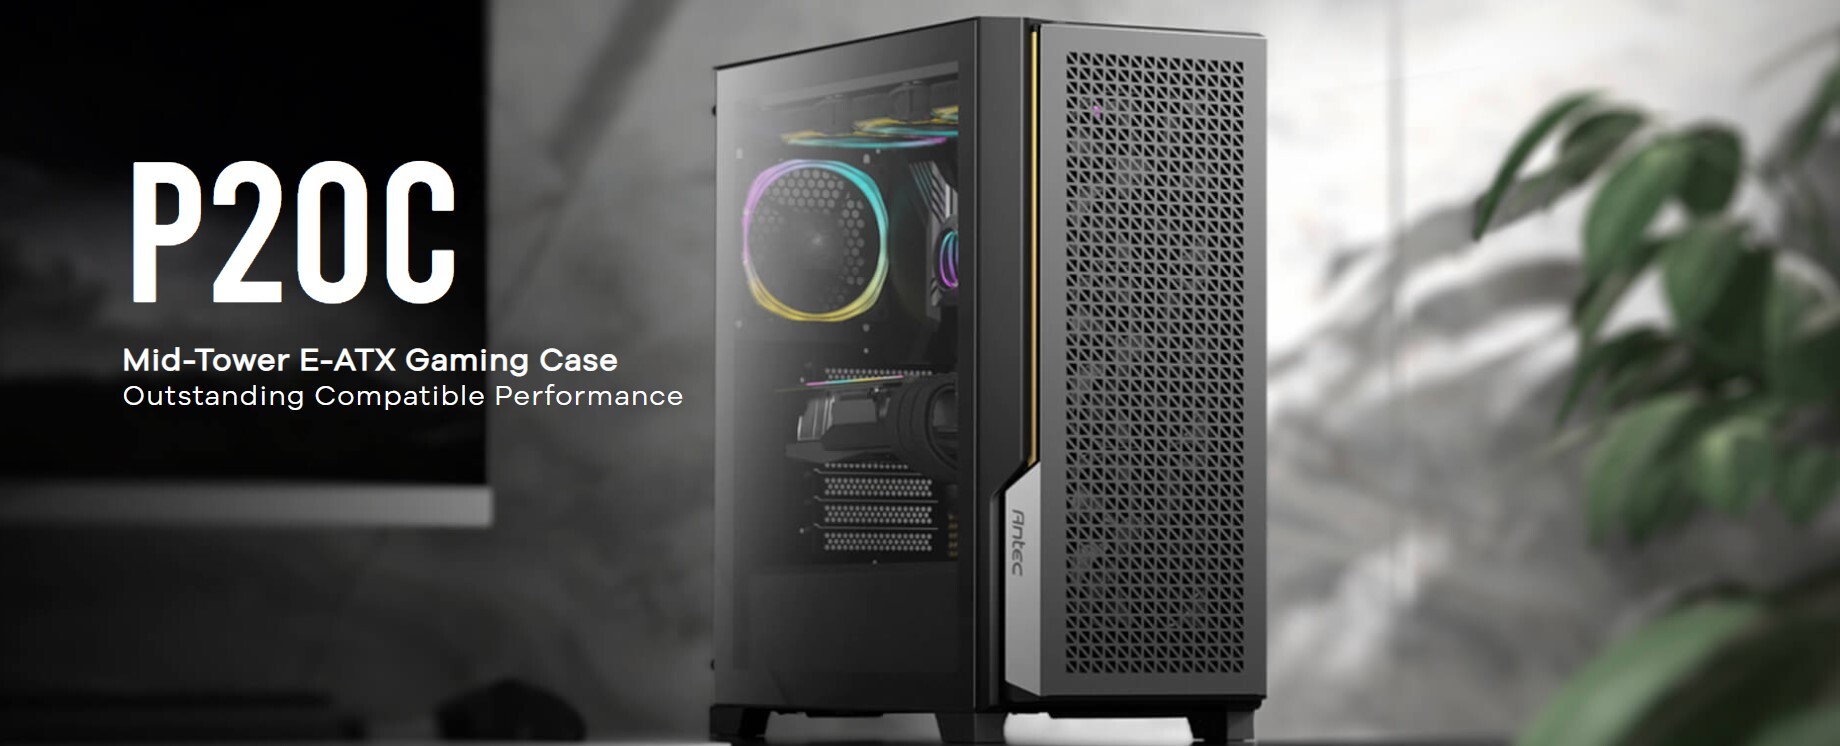 Antec P20 Series E-ATX Gaming Chassis